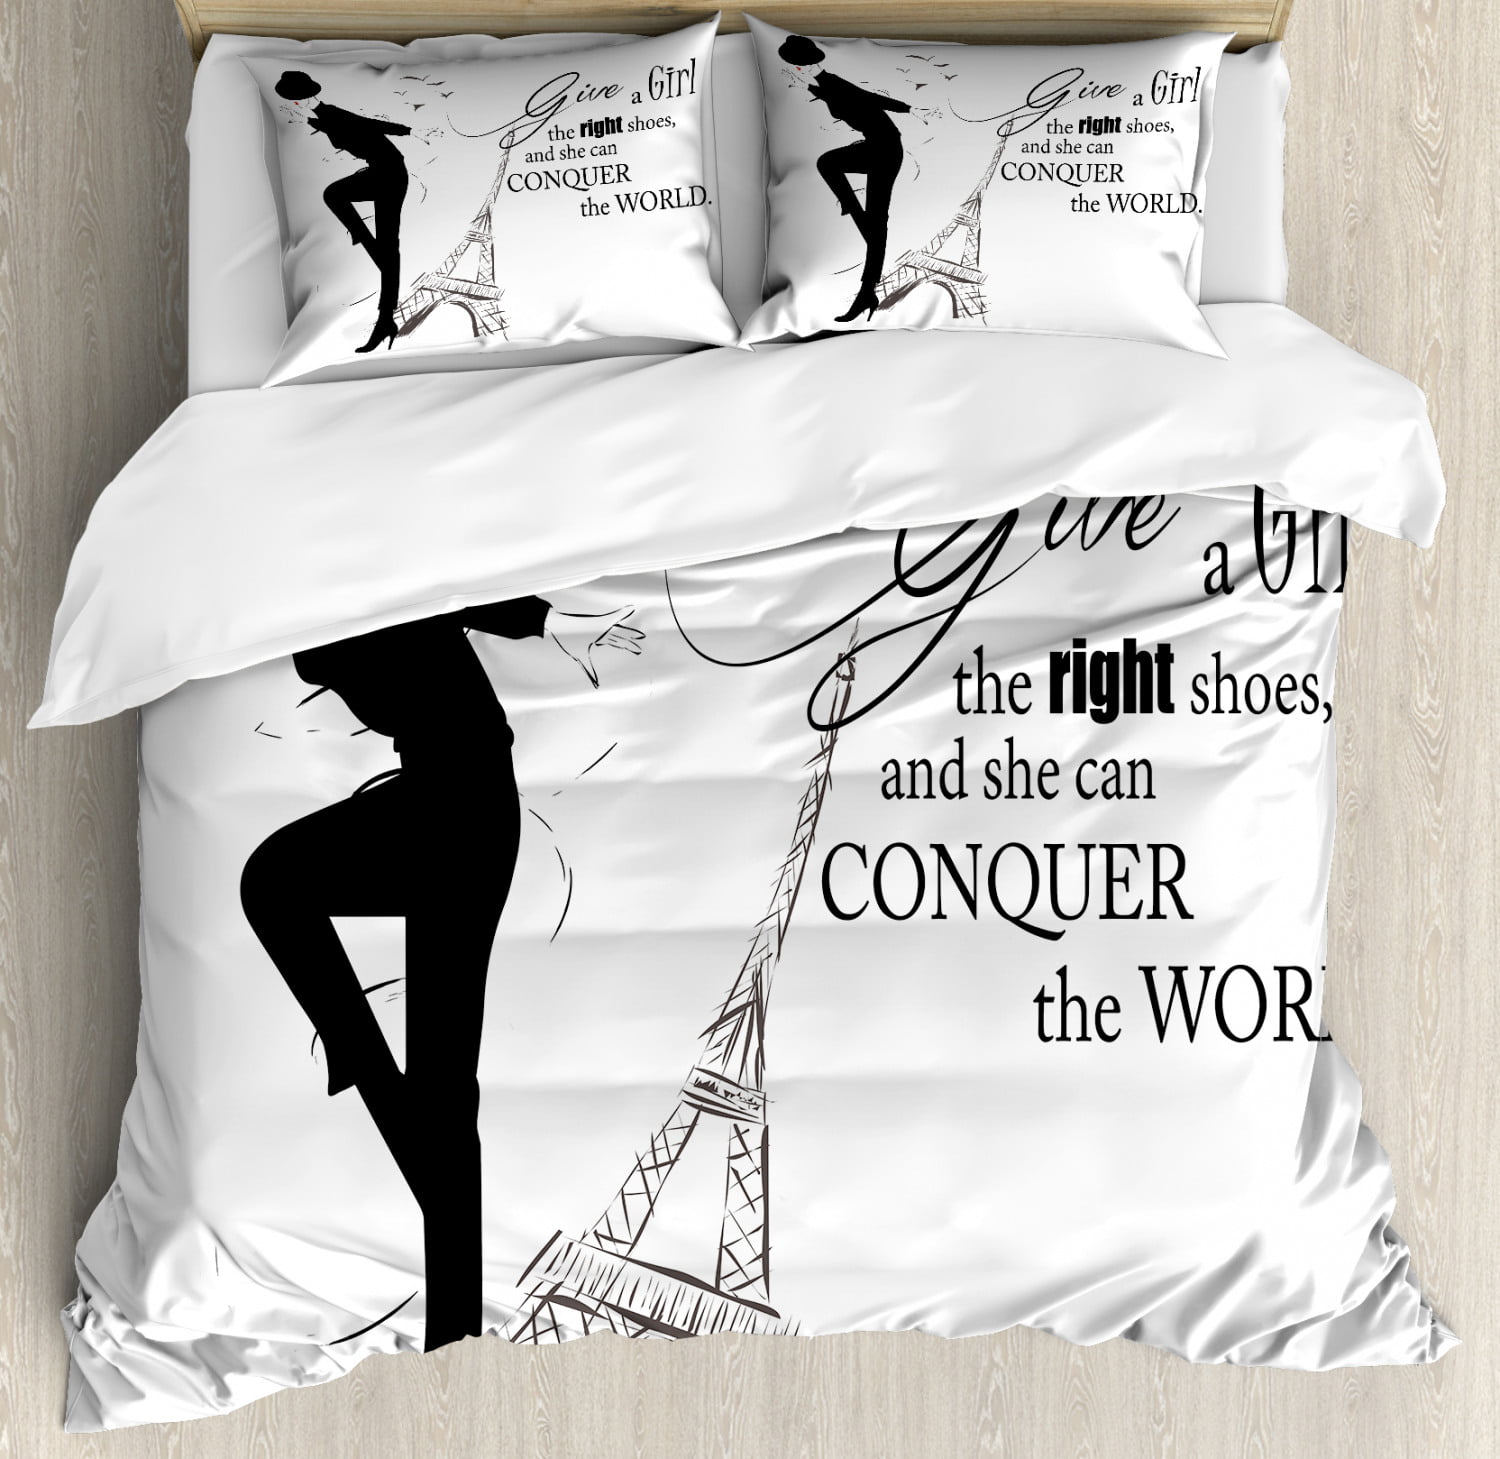 Details about   Letter Printing Bedding Cover RU US Size Bedding Quilt Cover White Black Feng8